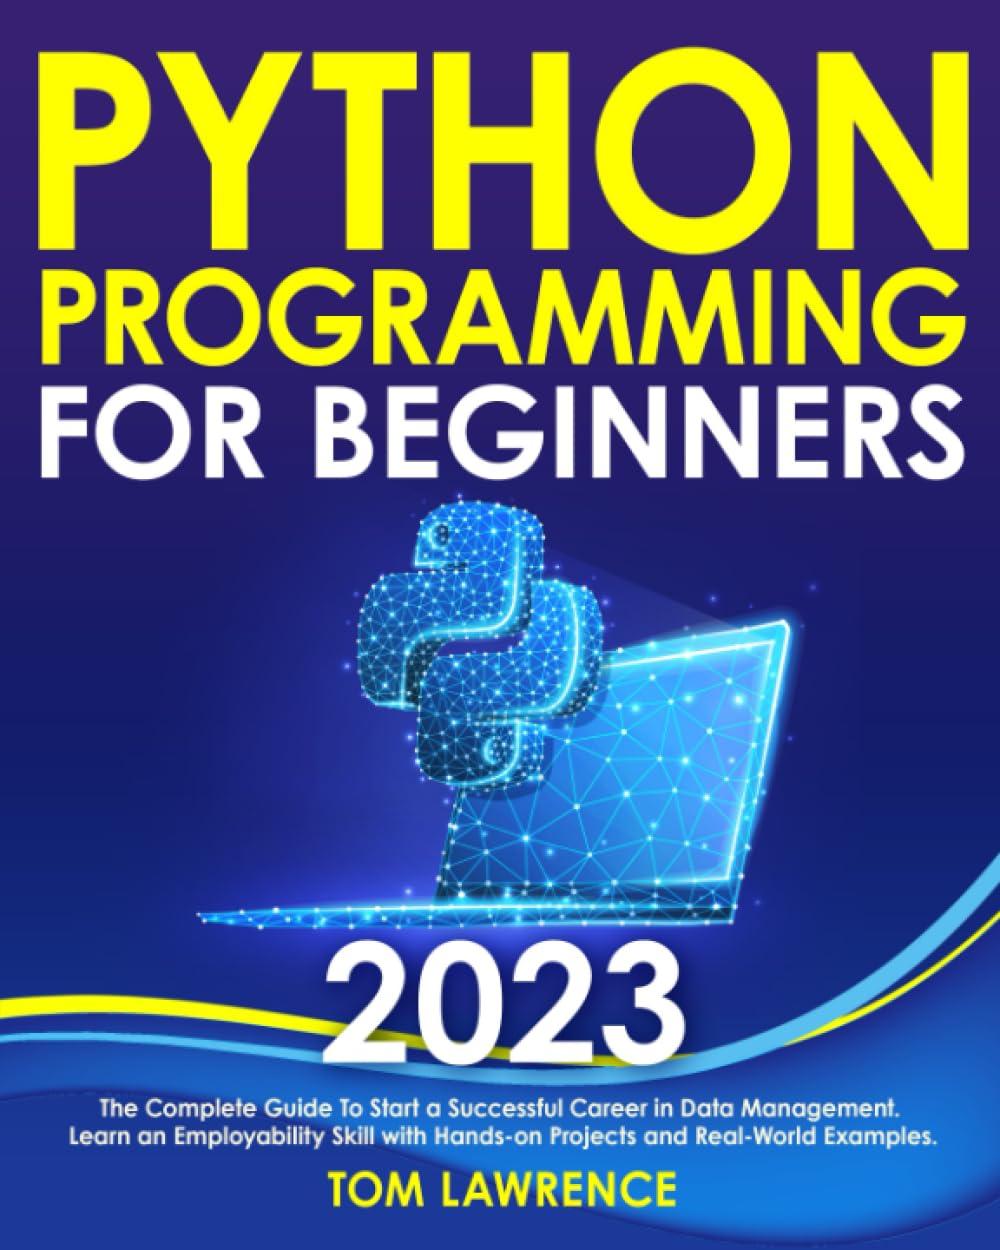 Python Programming For Beginners The Complete Guide To Start A Successful Career In Data Management  Learn An Employability Skill With Hands On Projects And Real World Examples